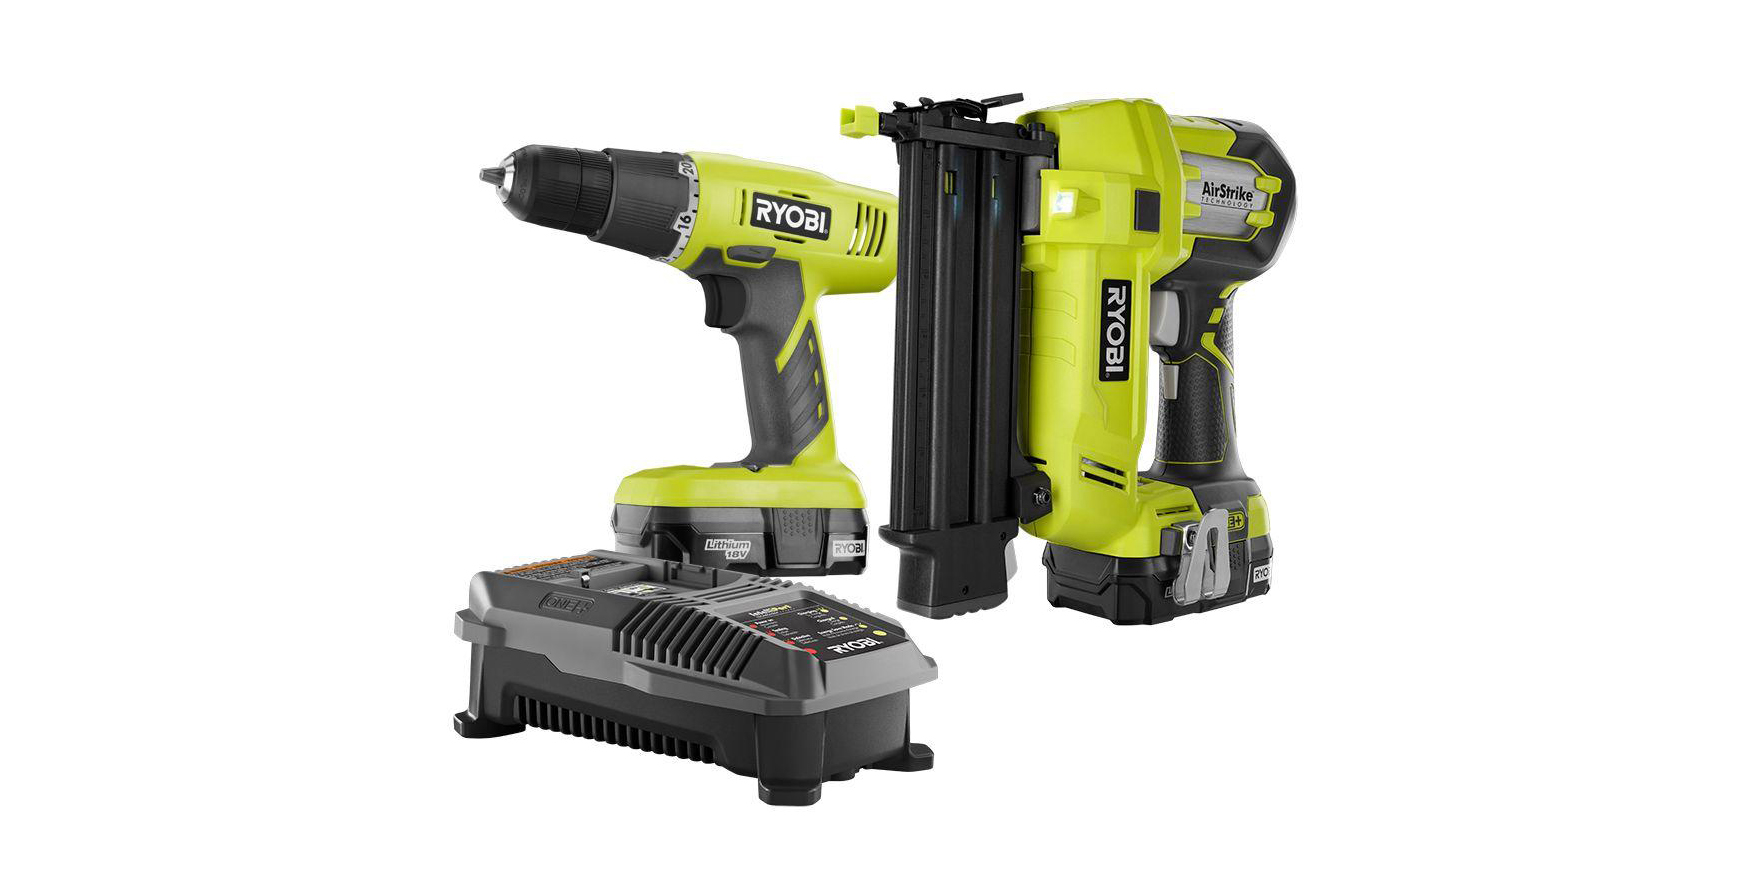 Home Depot reduces prices on RYOBI and RIDGID tools by up to 50 today only